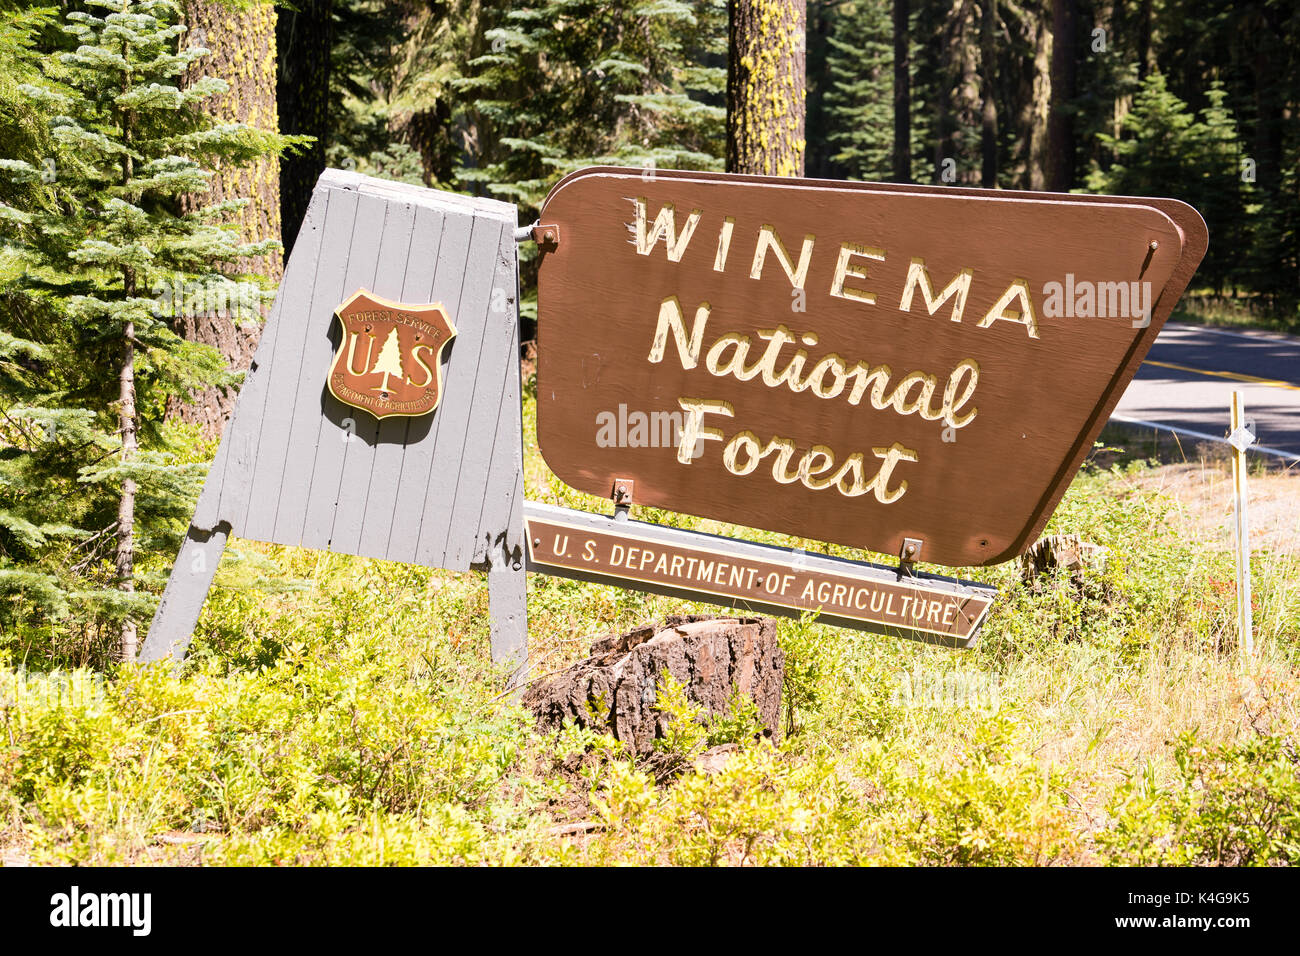 The Winema National Forest sign is leaning forward Stock Photo